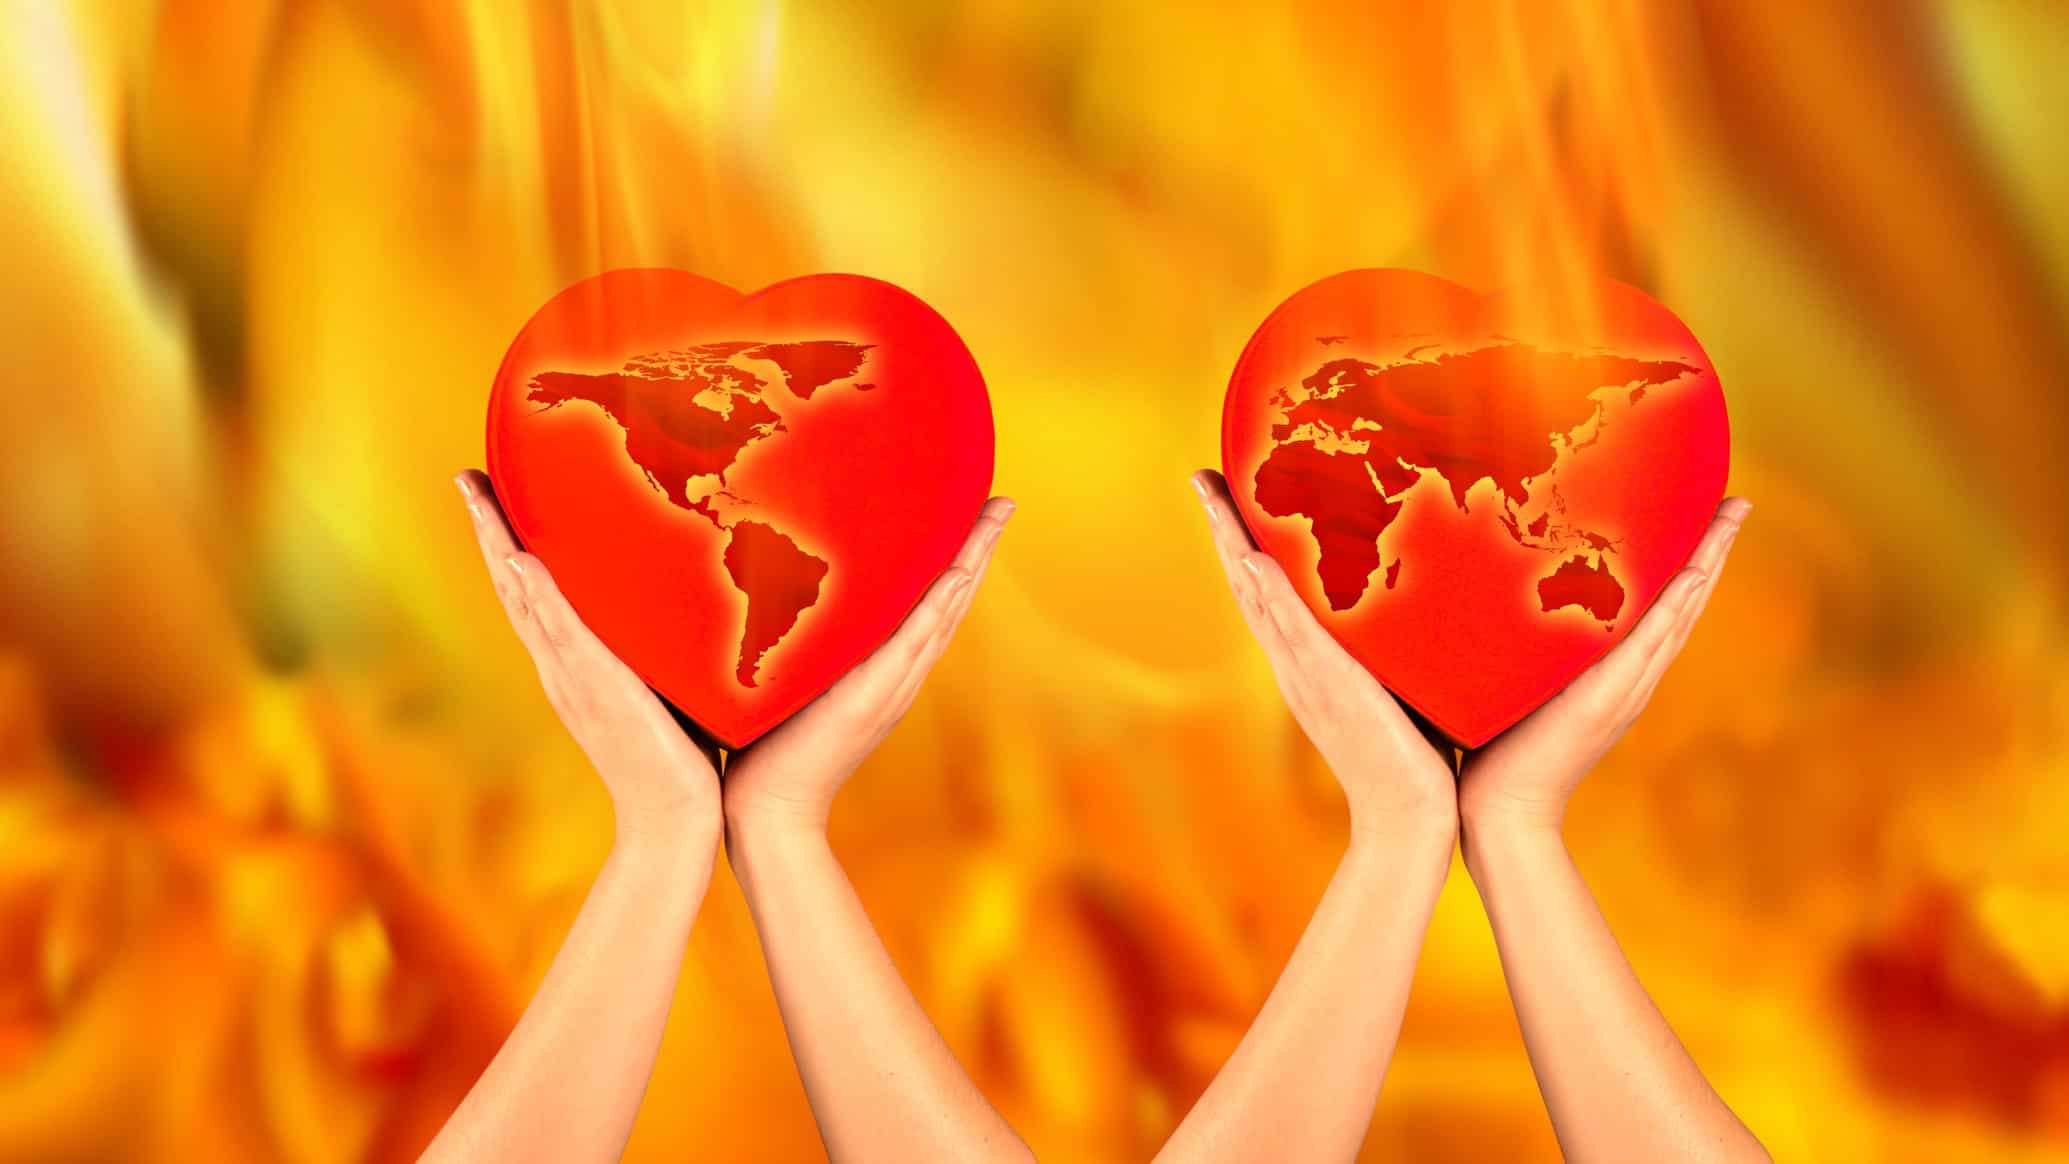 graphic image of the map of the globe held in two hands against the backdrop of burning flames.